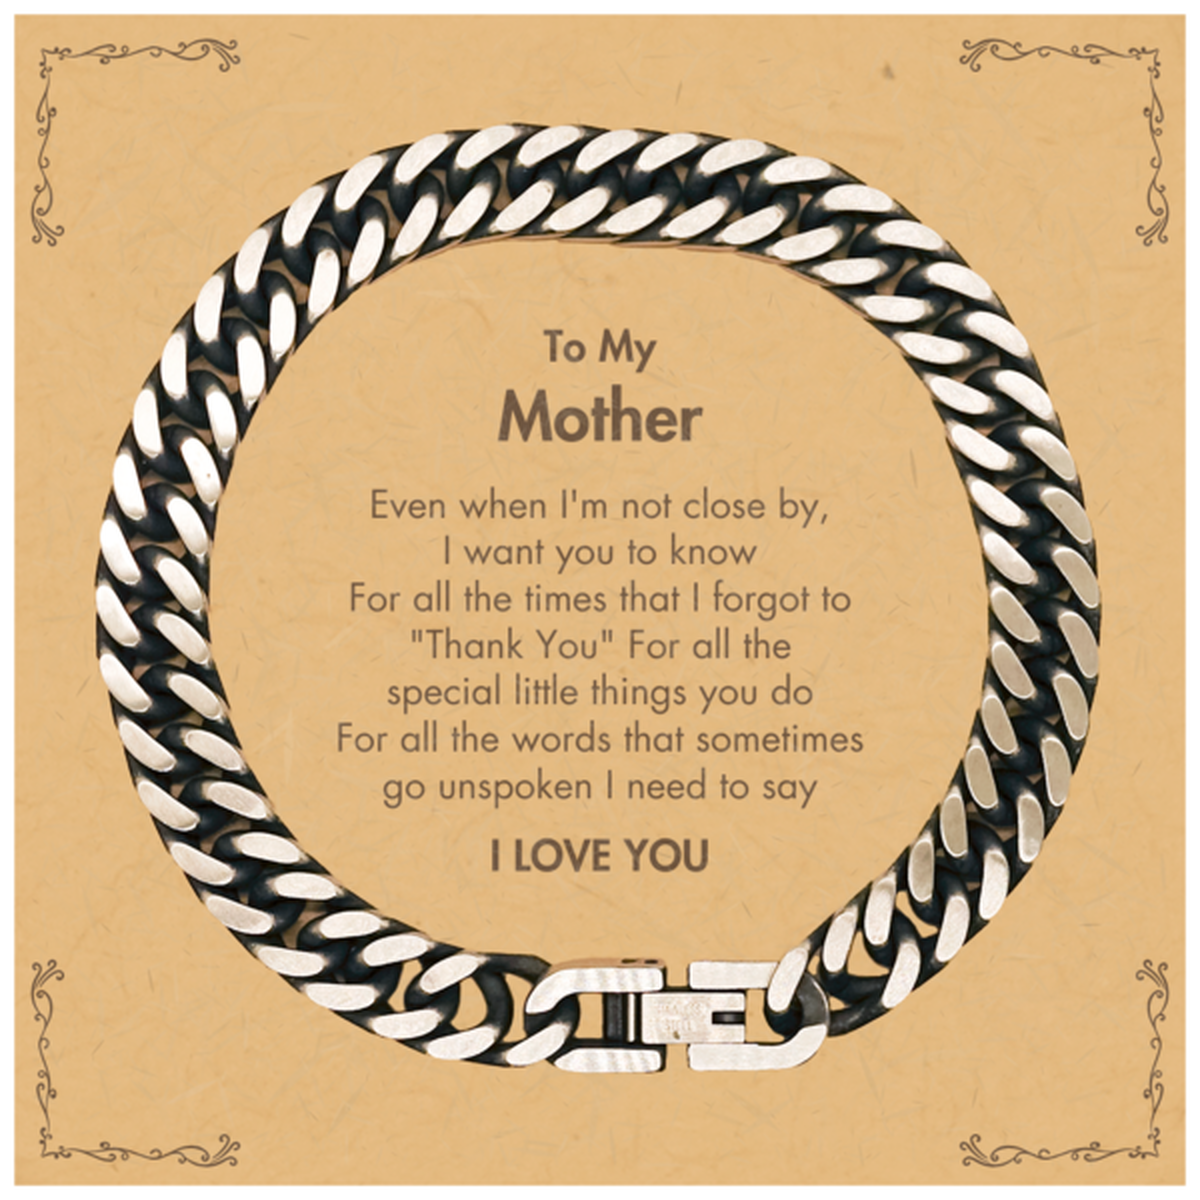 Thank You Gifts for Mother, Keepsake Cuban Link Chain Bracelet Gifts for Mother Birthday Mother's day Father's Day Mother For all the words That sometimes go unspoken I need to say I LOVE YOU